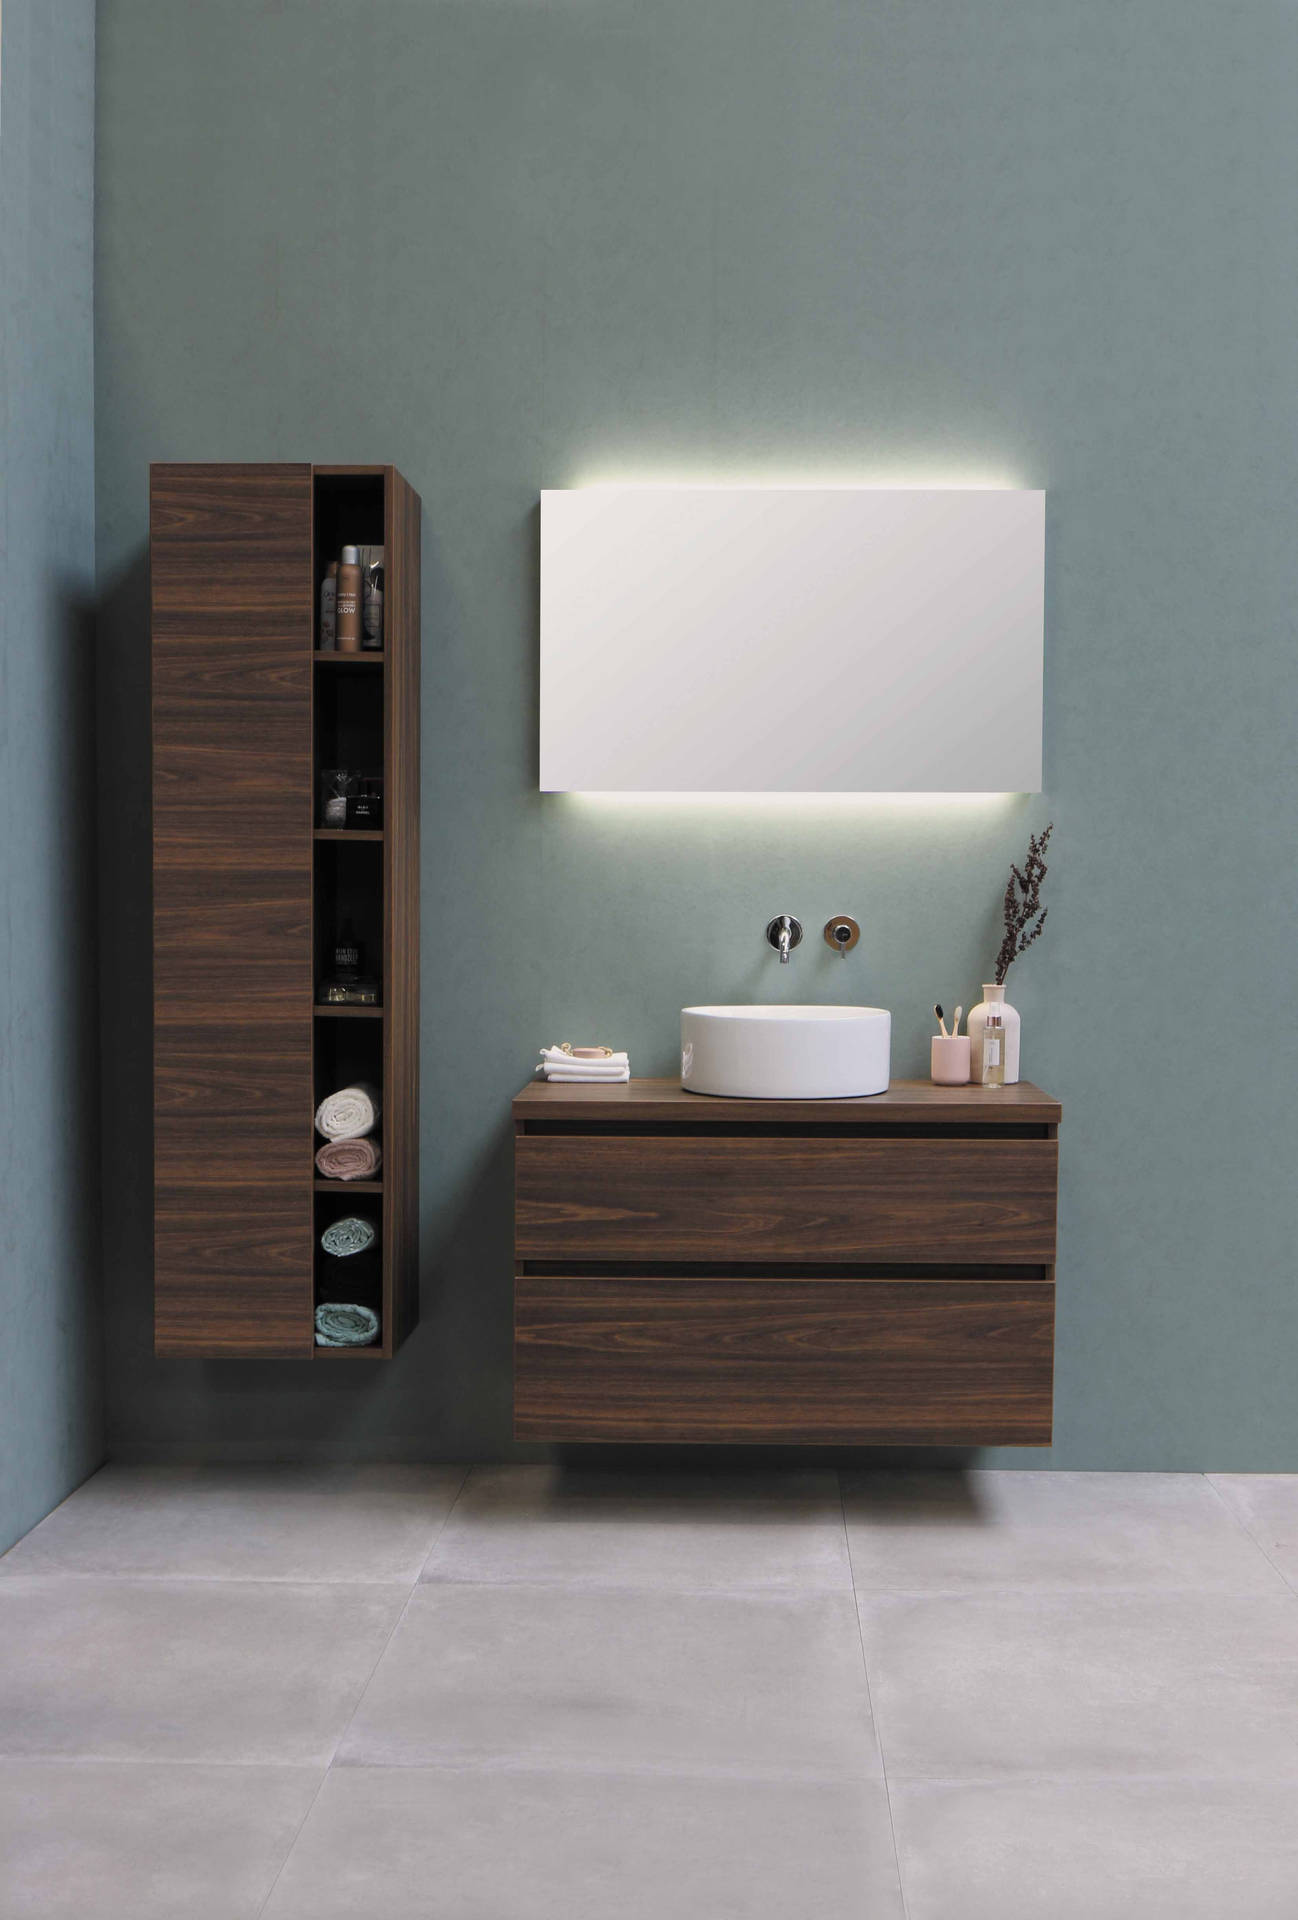 A simple aesthetic wallpaper of bathroom interior design idea with decorative brown wooden cabinets.